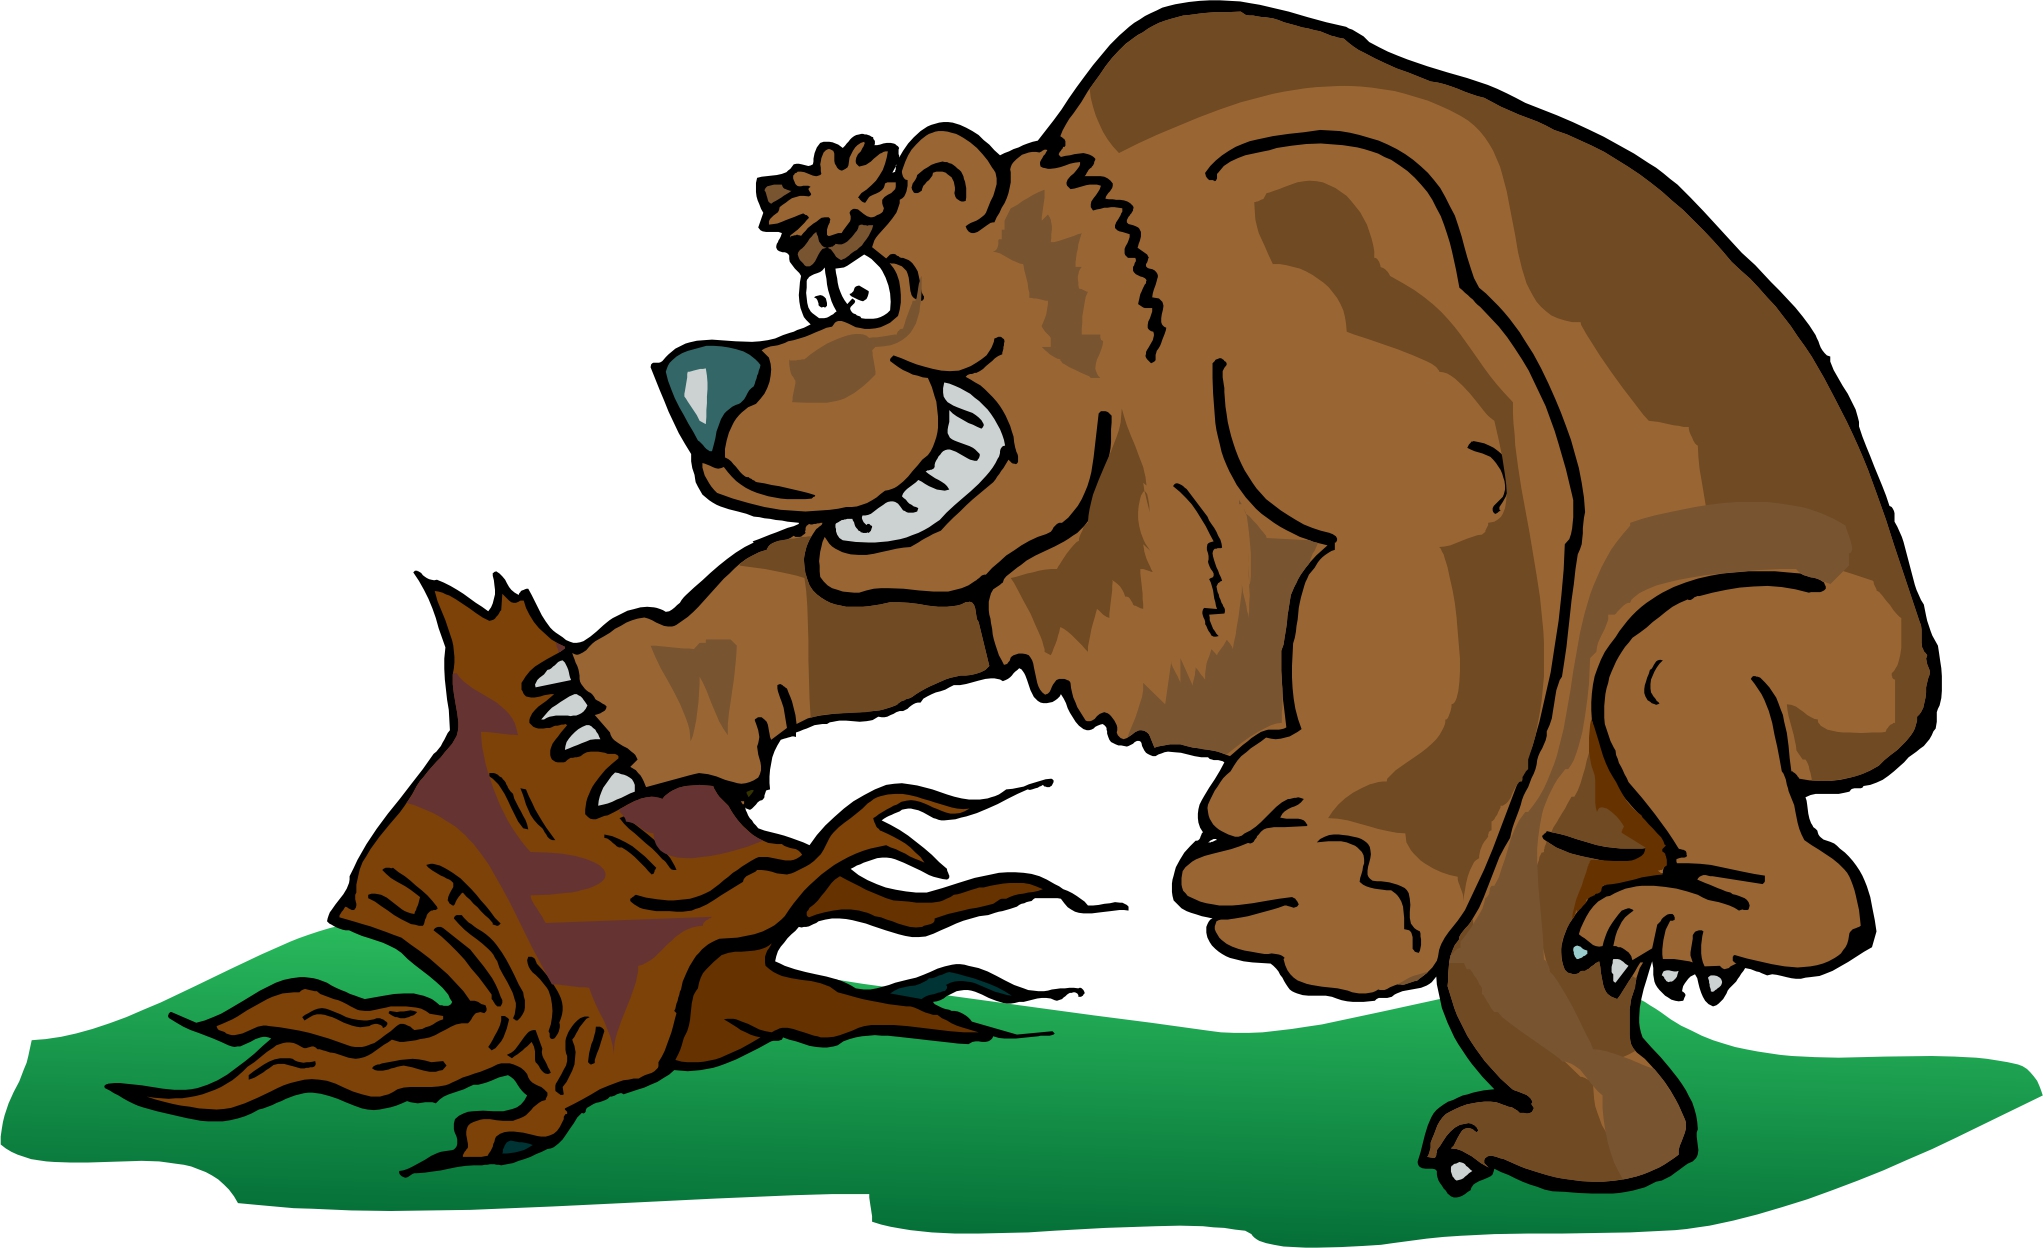 grizzly angry bear cartoon.